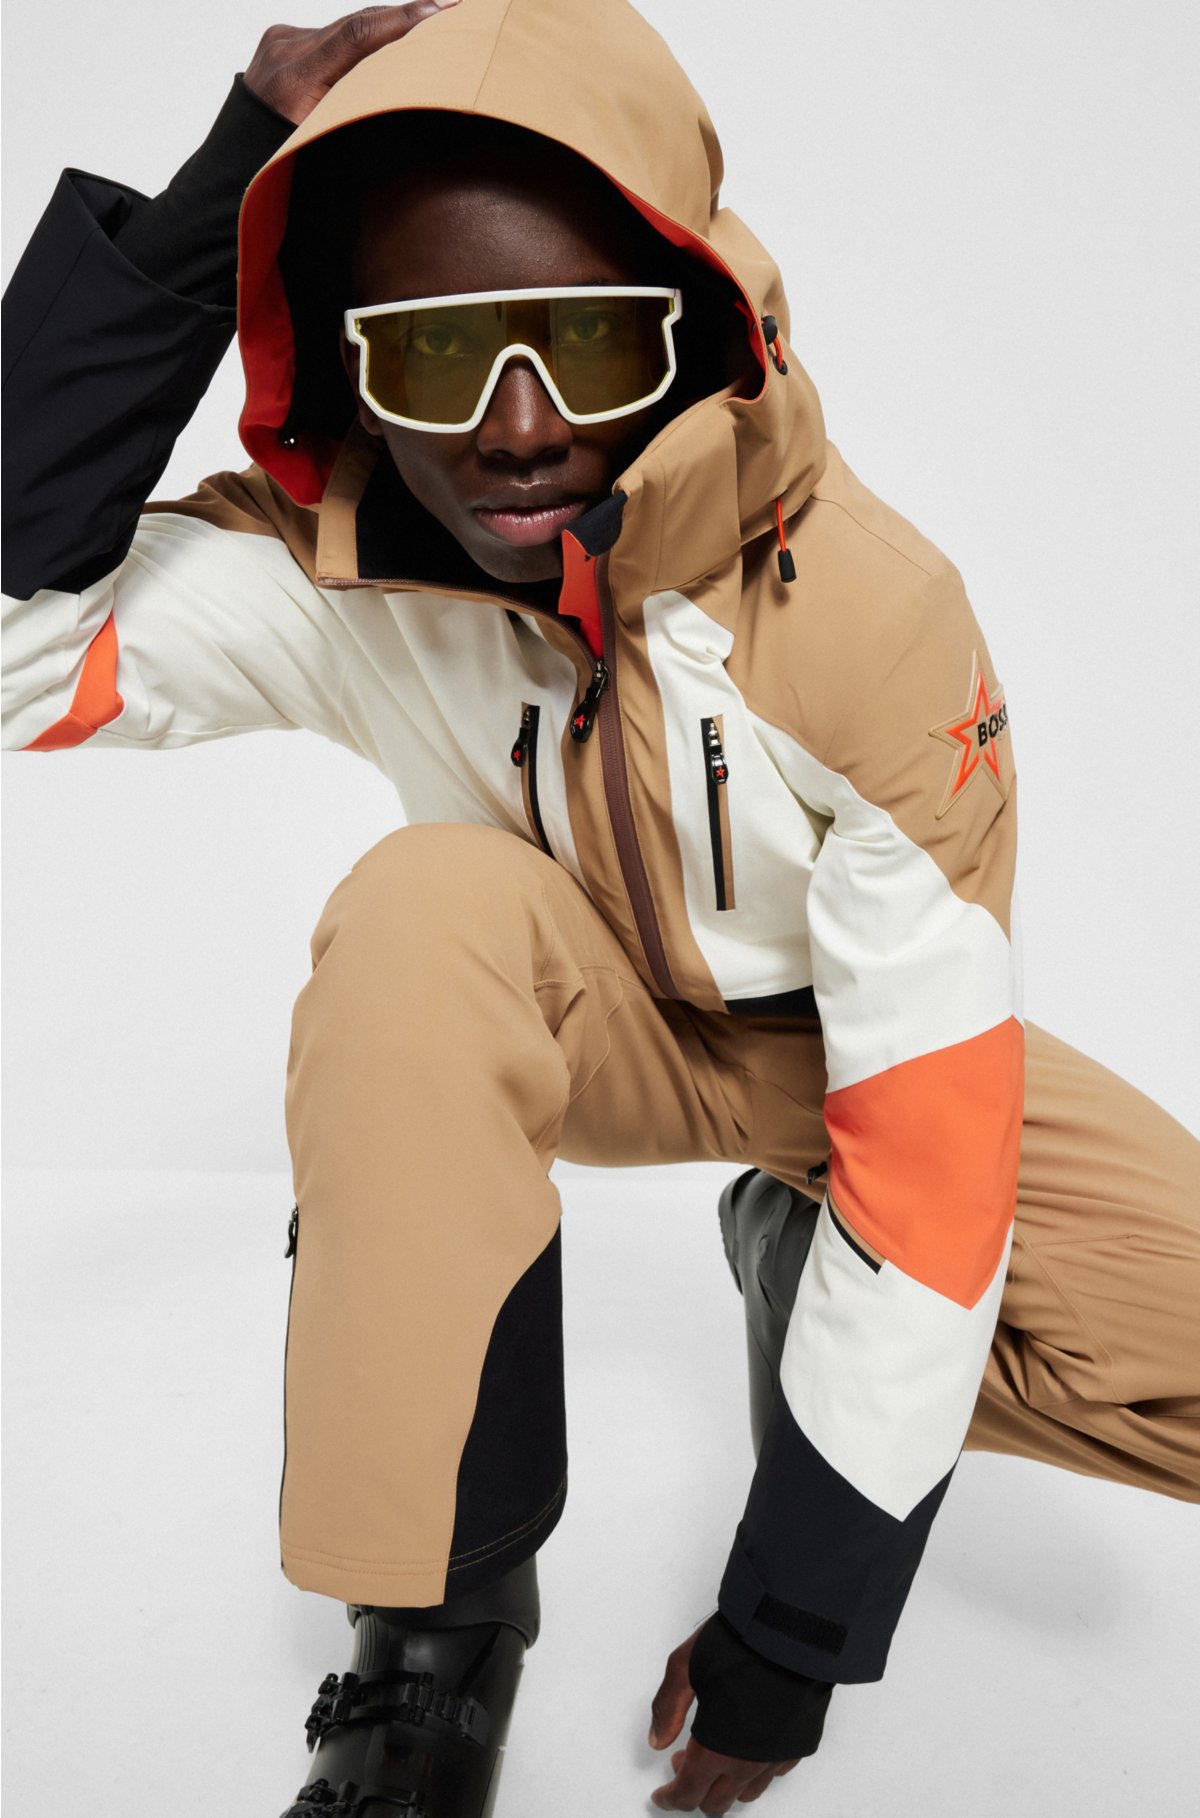 Why Ski Wear Is Having a Moment This Winter